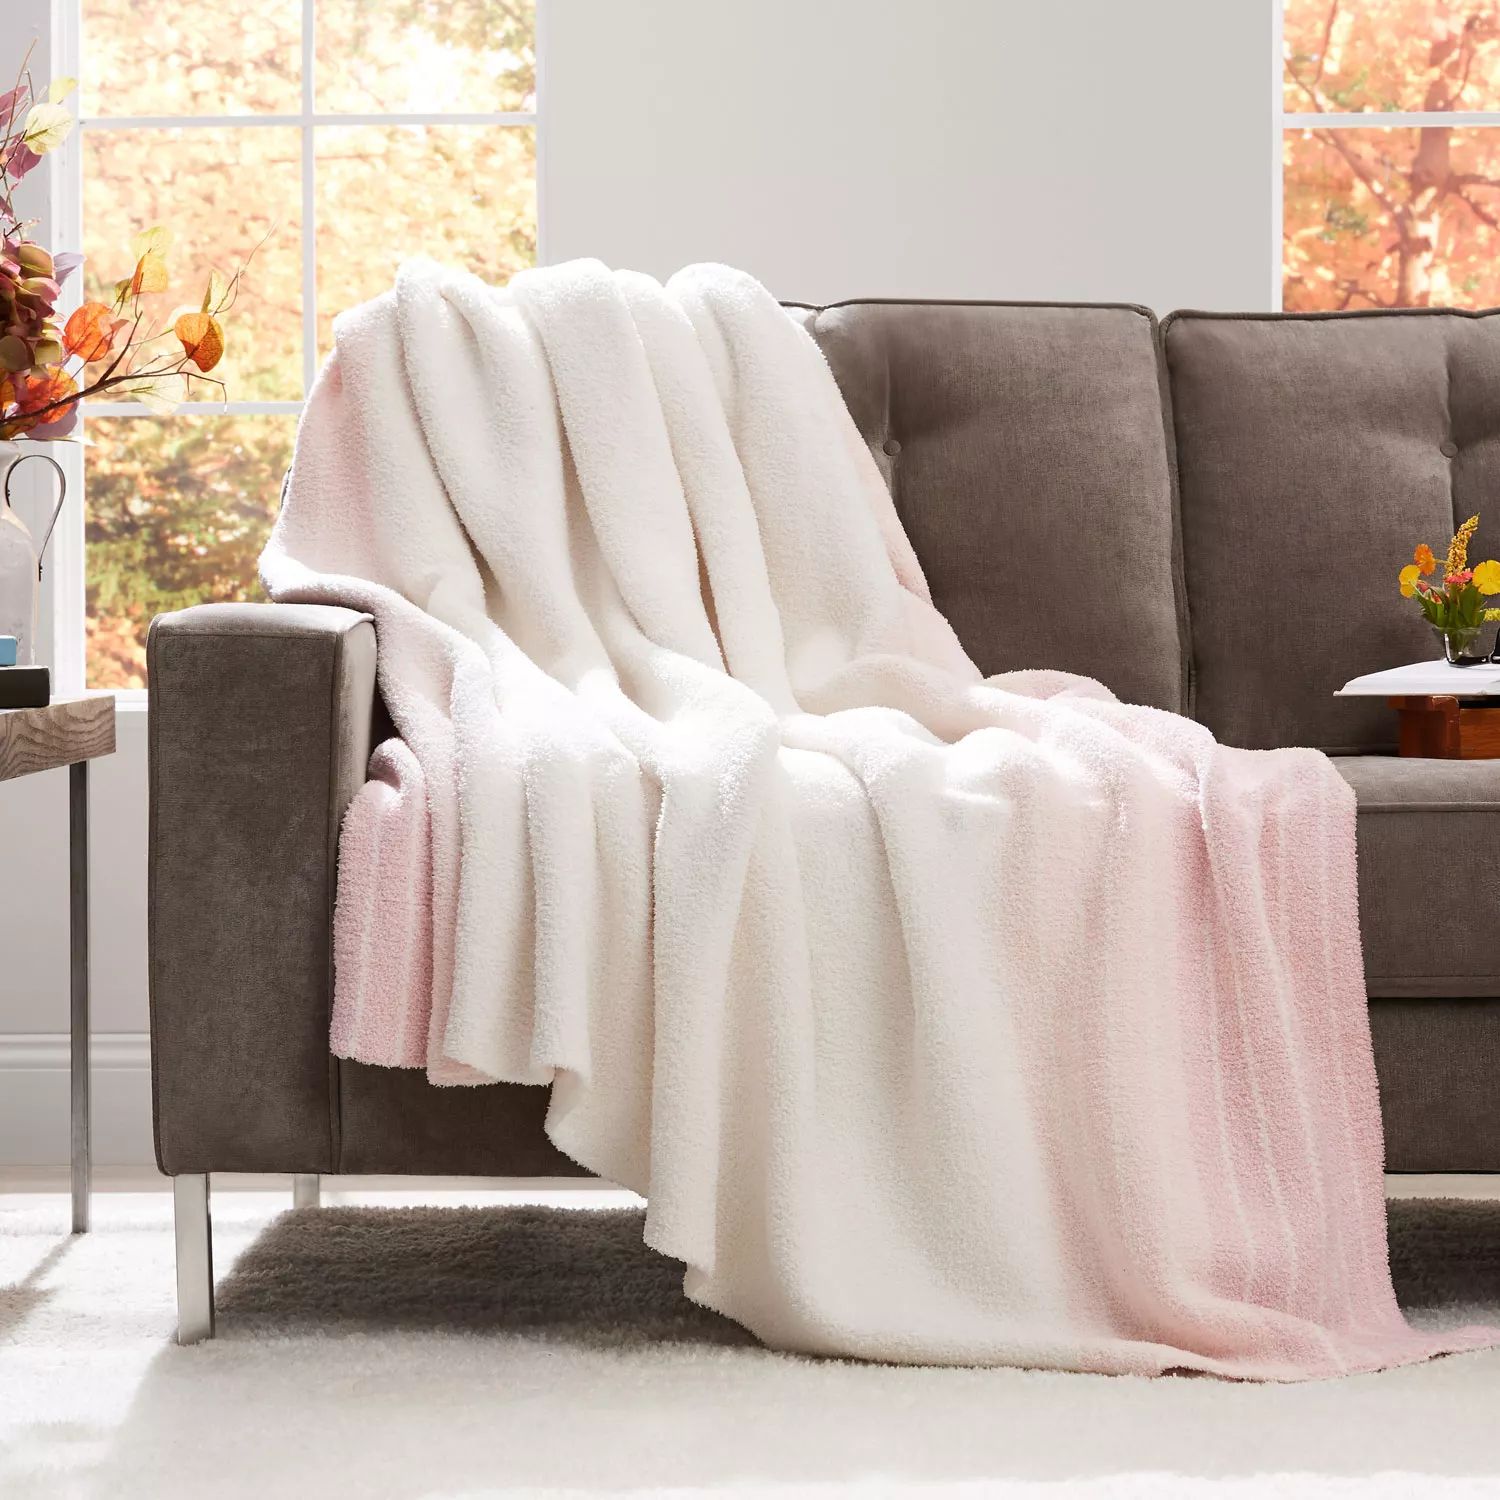 Member’s Mark Luxury Premier Collection Cozy Knit Heathered Border Throw (Assorted Colors) | Sam's Club